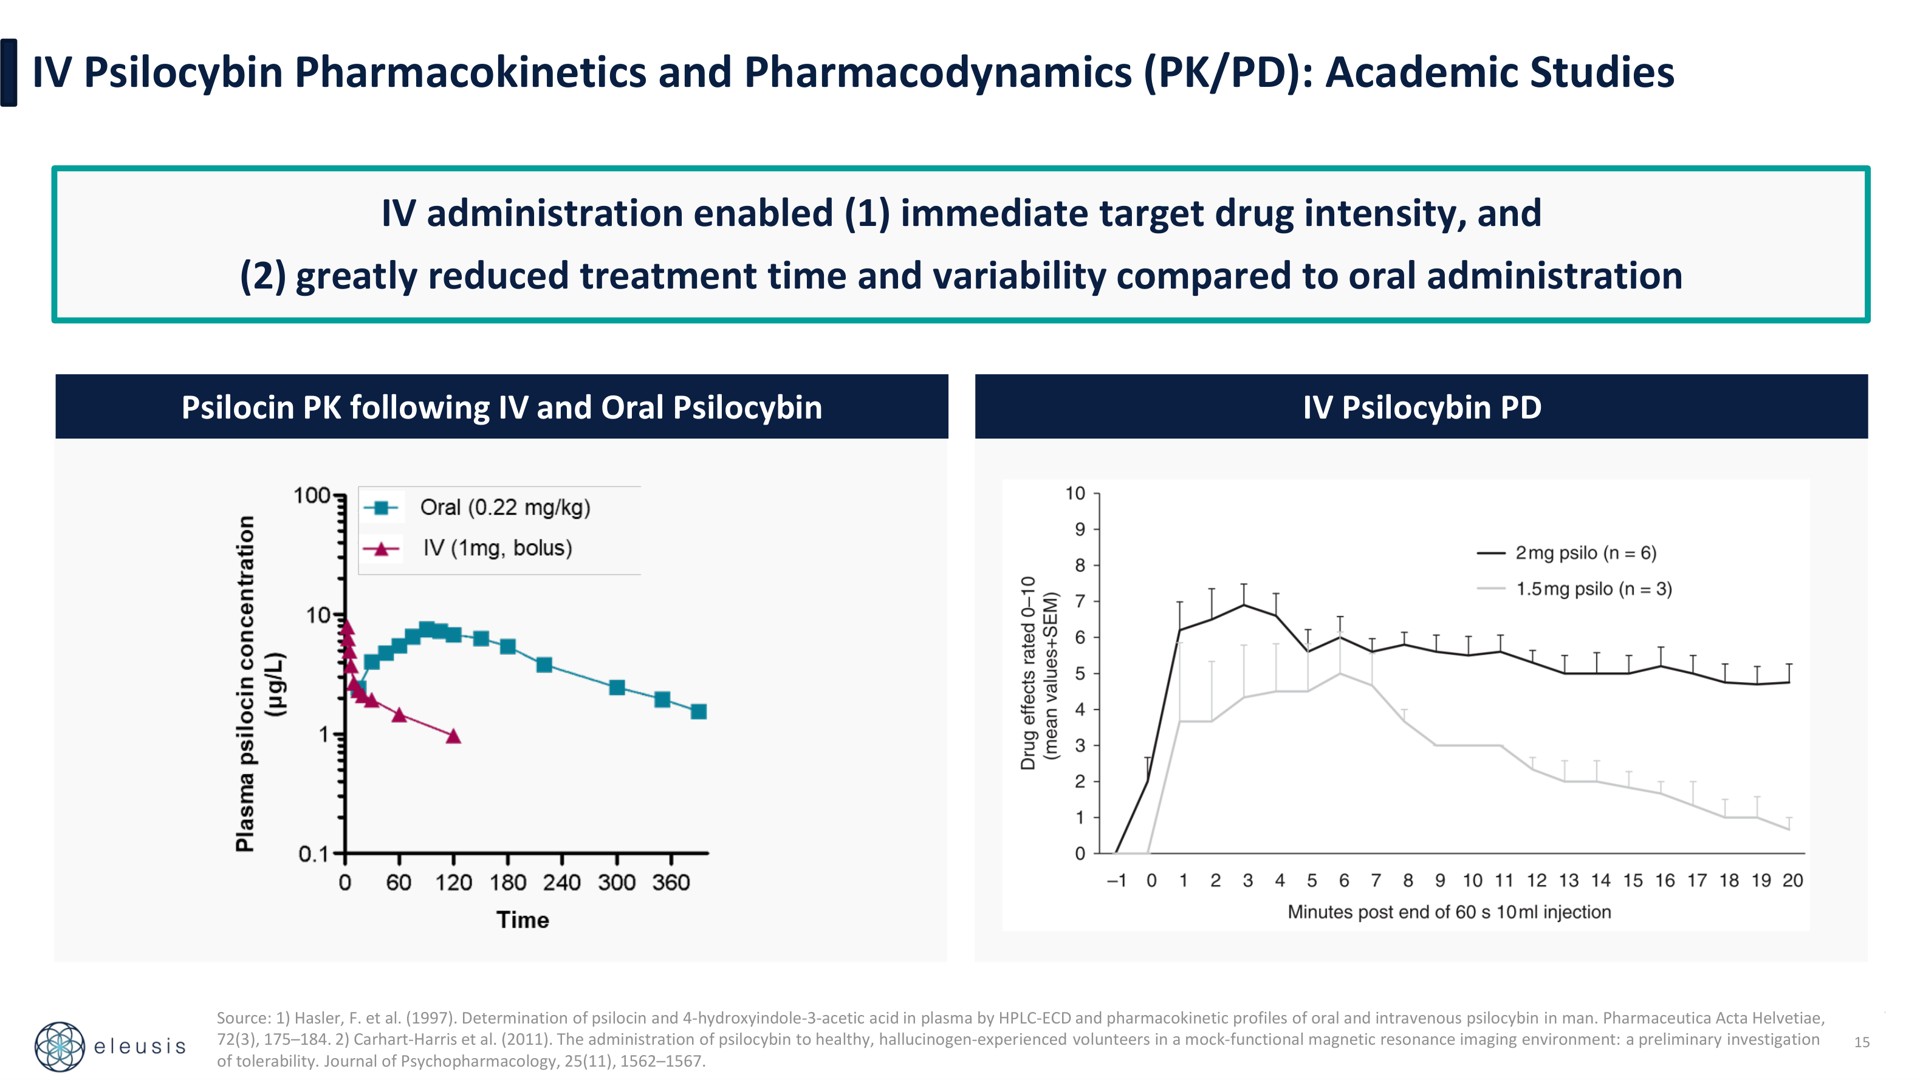 and pharmacodynamics academic studies administration enabled immediate target drug intensity and greatly reduced treatment time and variability compared to oral administration | Eleusis